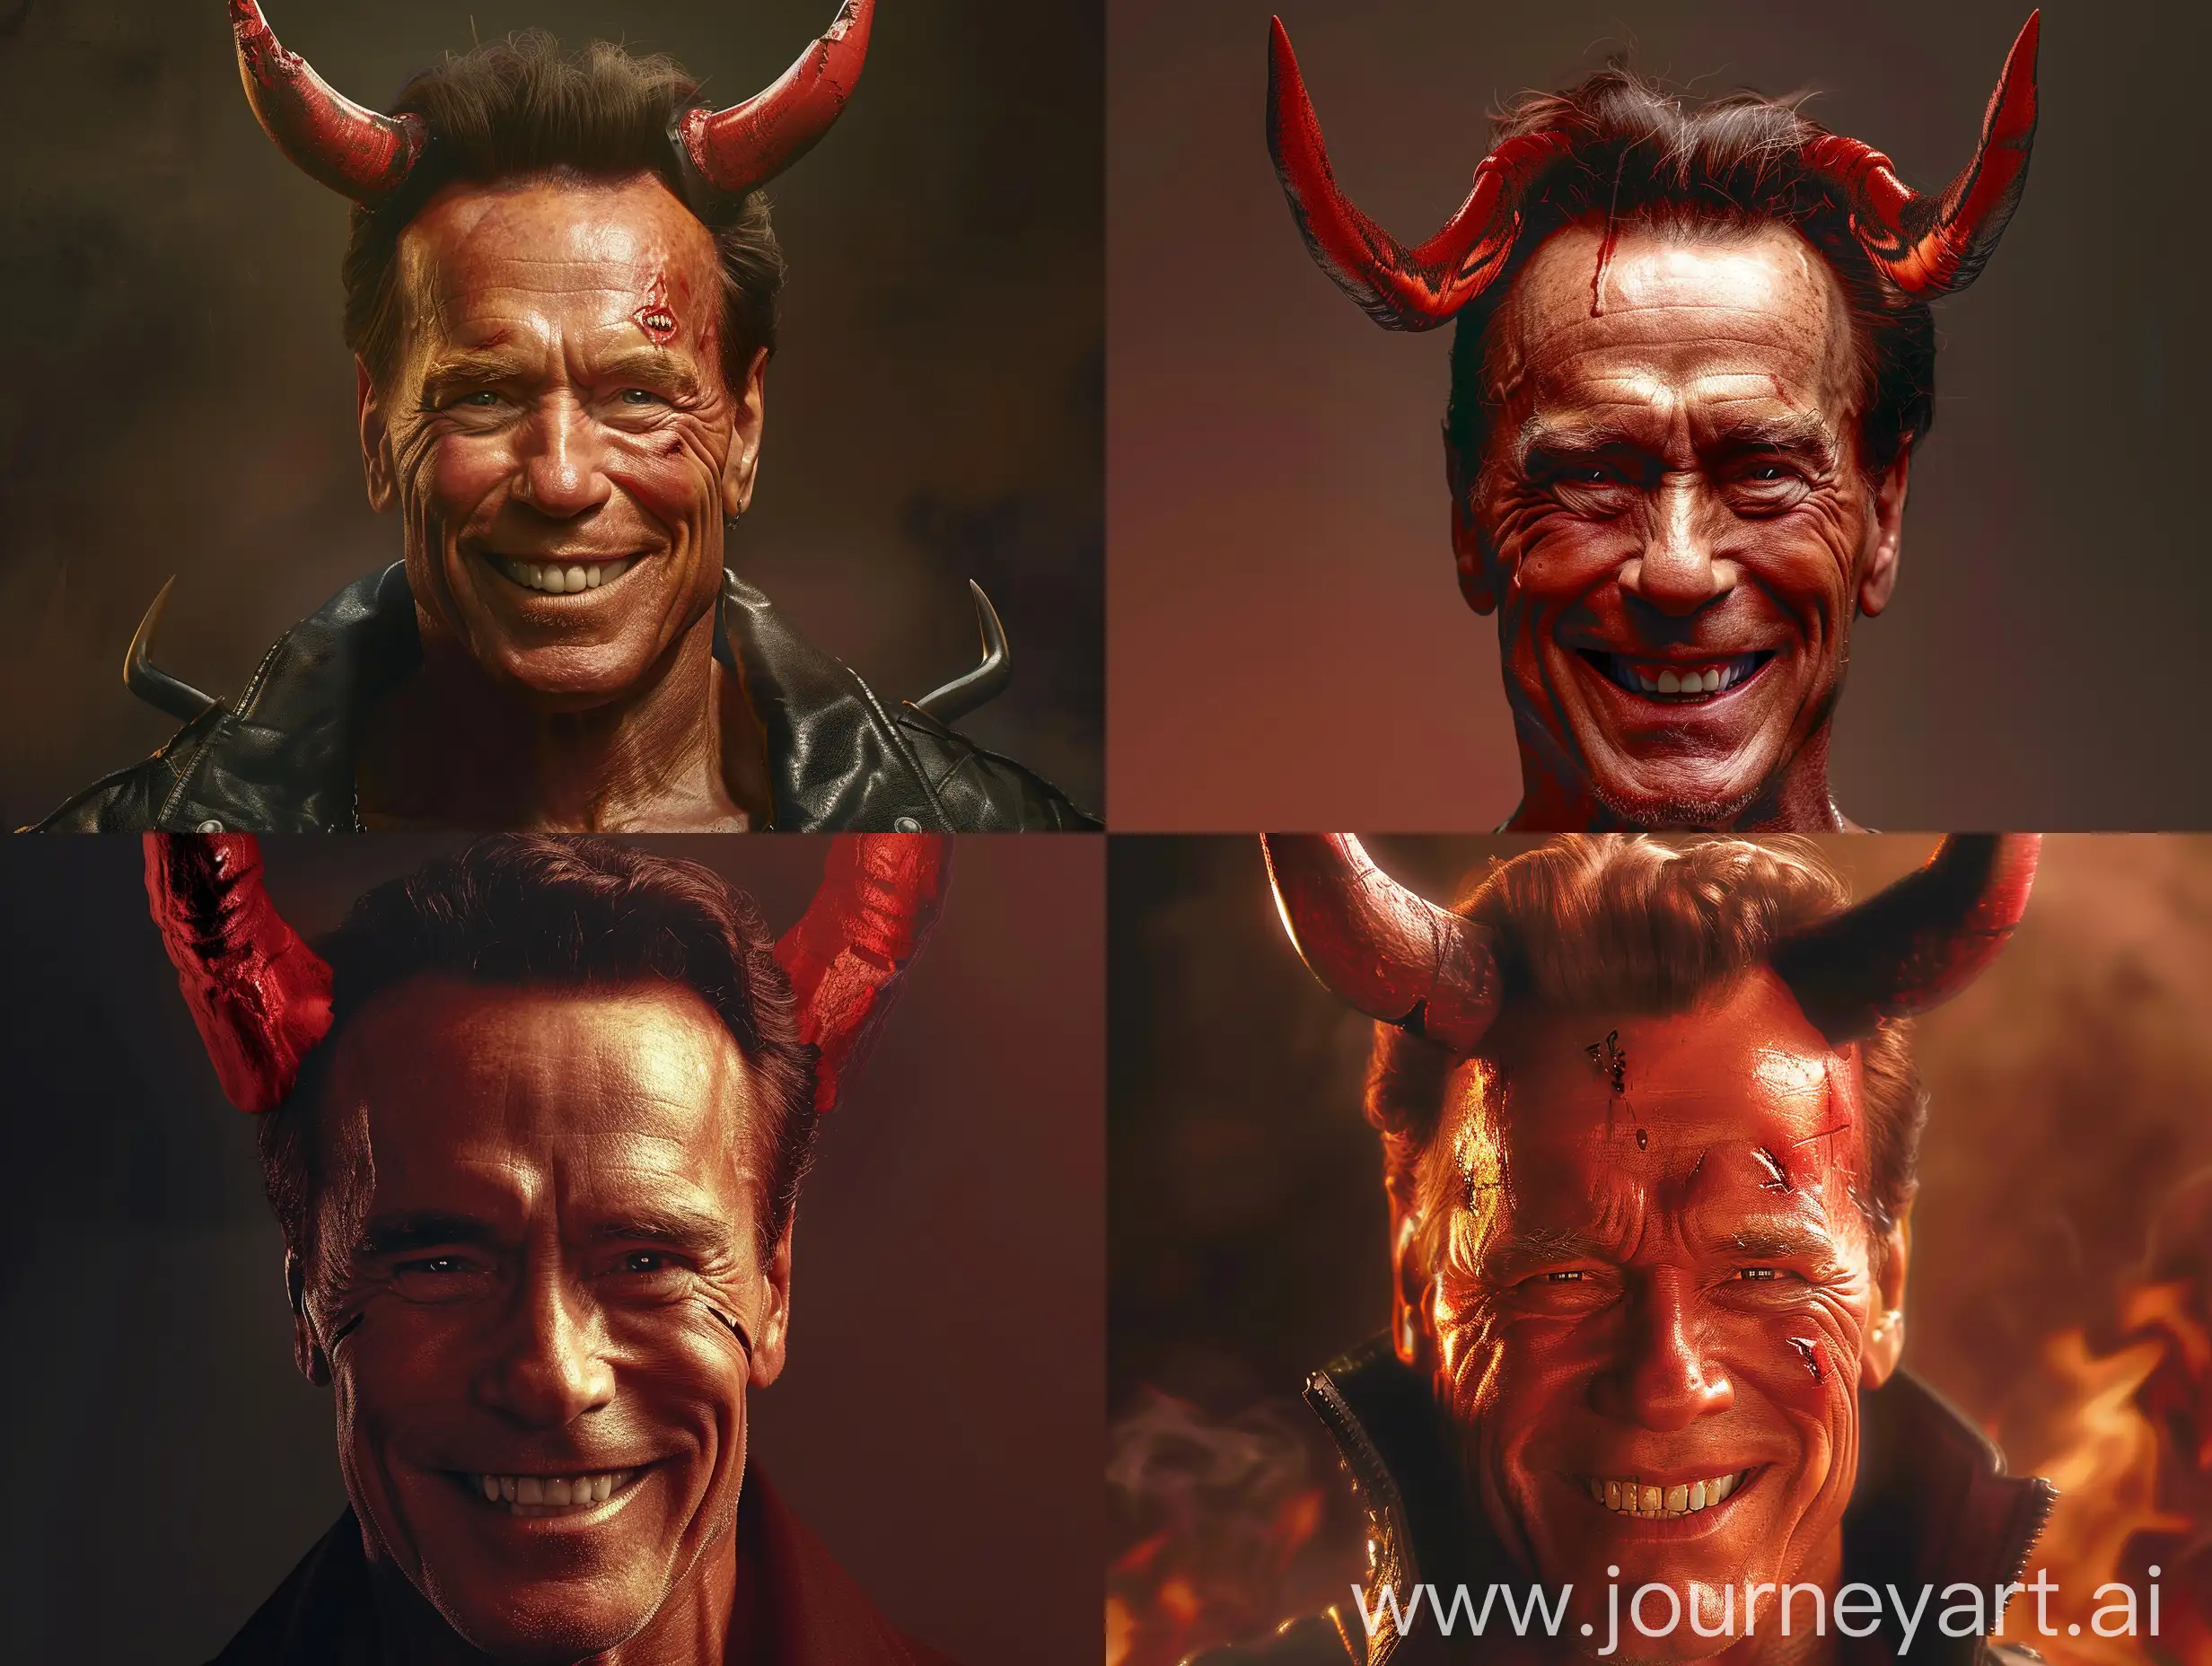 YouTube thumbnail depicting the concept "Dark Side of Being Famous: Arnold Schwarzenegger". The thumbnail should prominently feature Arnold Schwarzenegger with a devilish smile, embodying a devil-like appearance with red horns protruding from his head. The image should be detailed and realistic, conveying the dual nature of fame and its potential darker aspects without any text overlaid on the thumbnail. The background should be neutral to emphasize Schwarzenegger's expression and the devilish features.